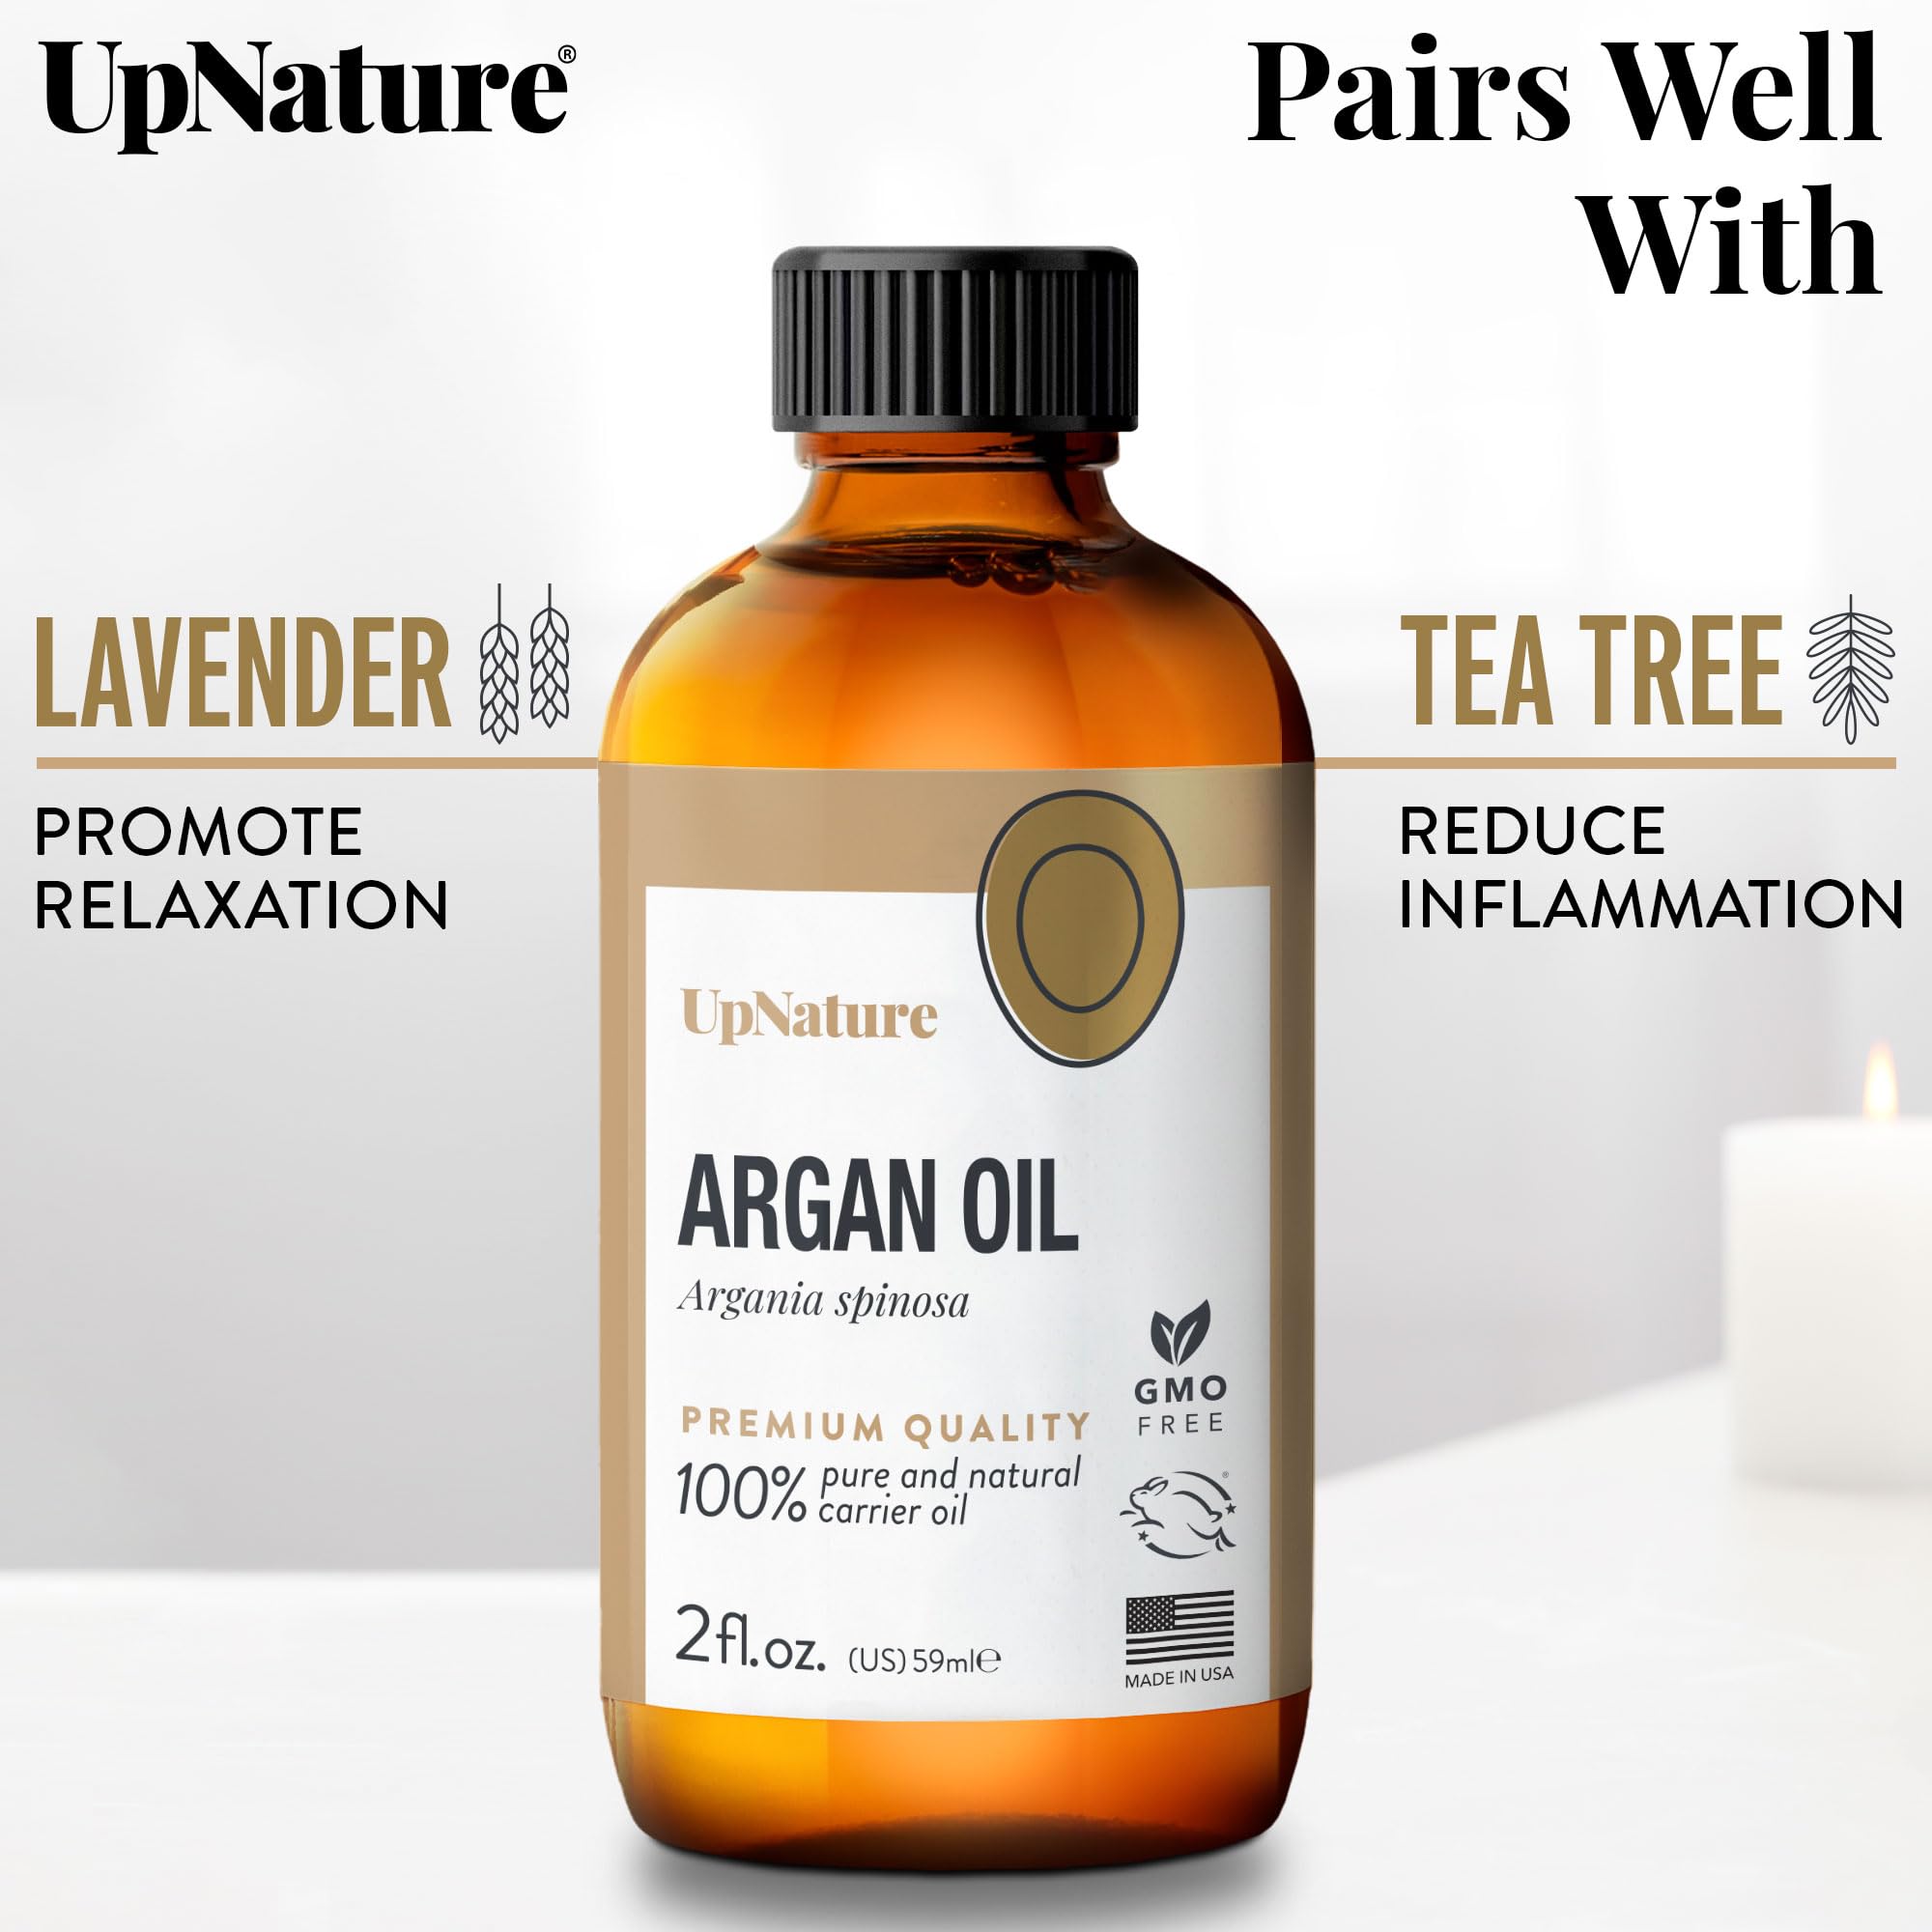 UpNature Argan Oil 2oz - 100% Natural & Pure Argan Oil for Hair Growth, Natural Cuticle Oil & Skin Care Products for Stretch Marks & Scars- Carrier Oil for Essential Oils for Skin